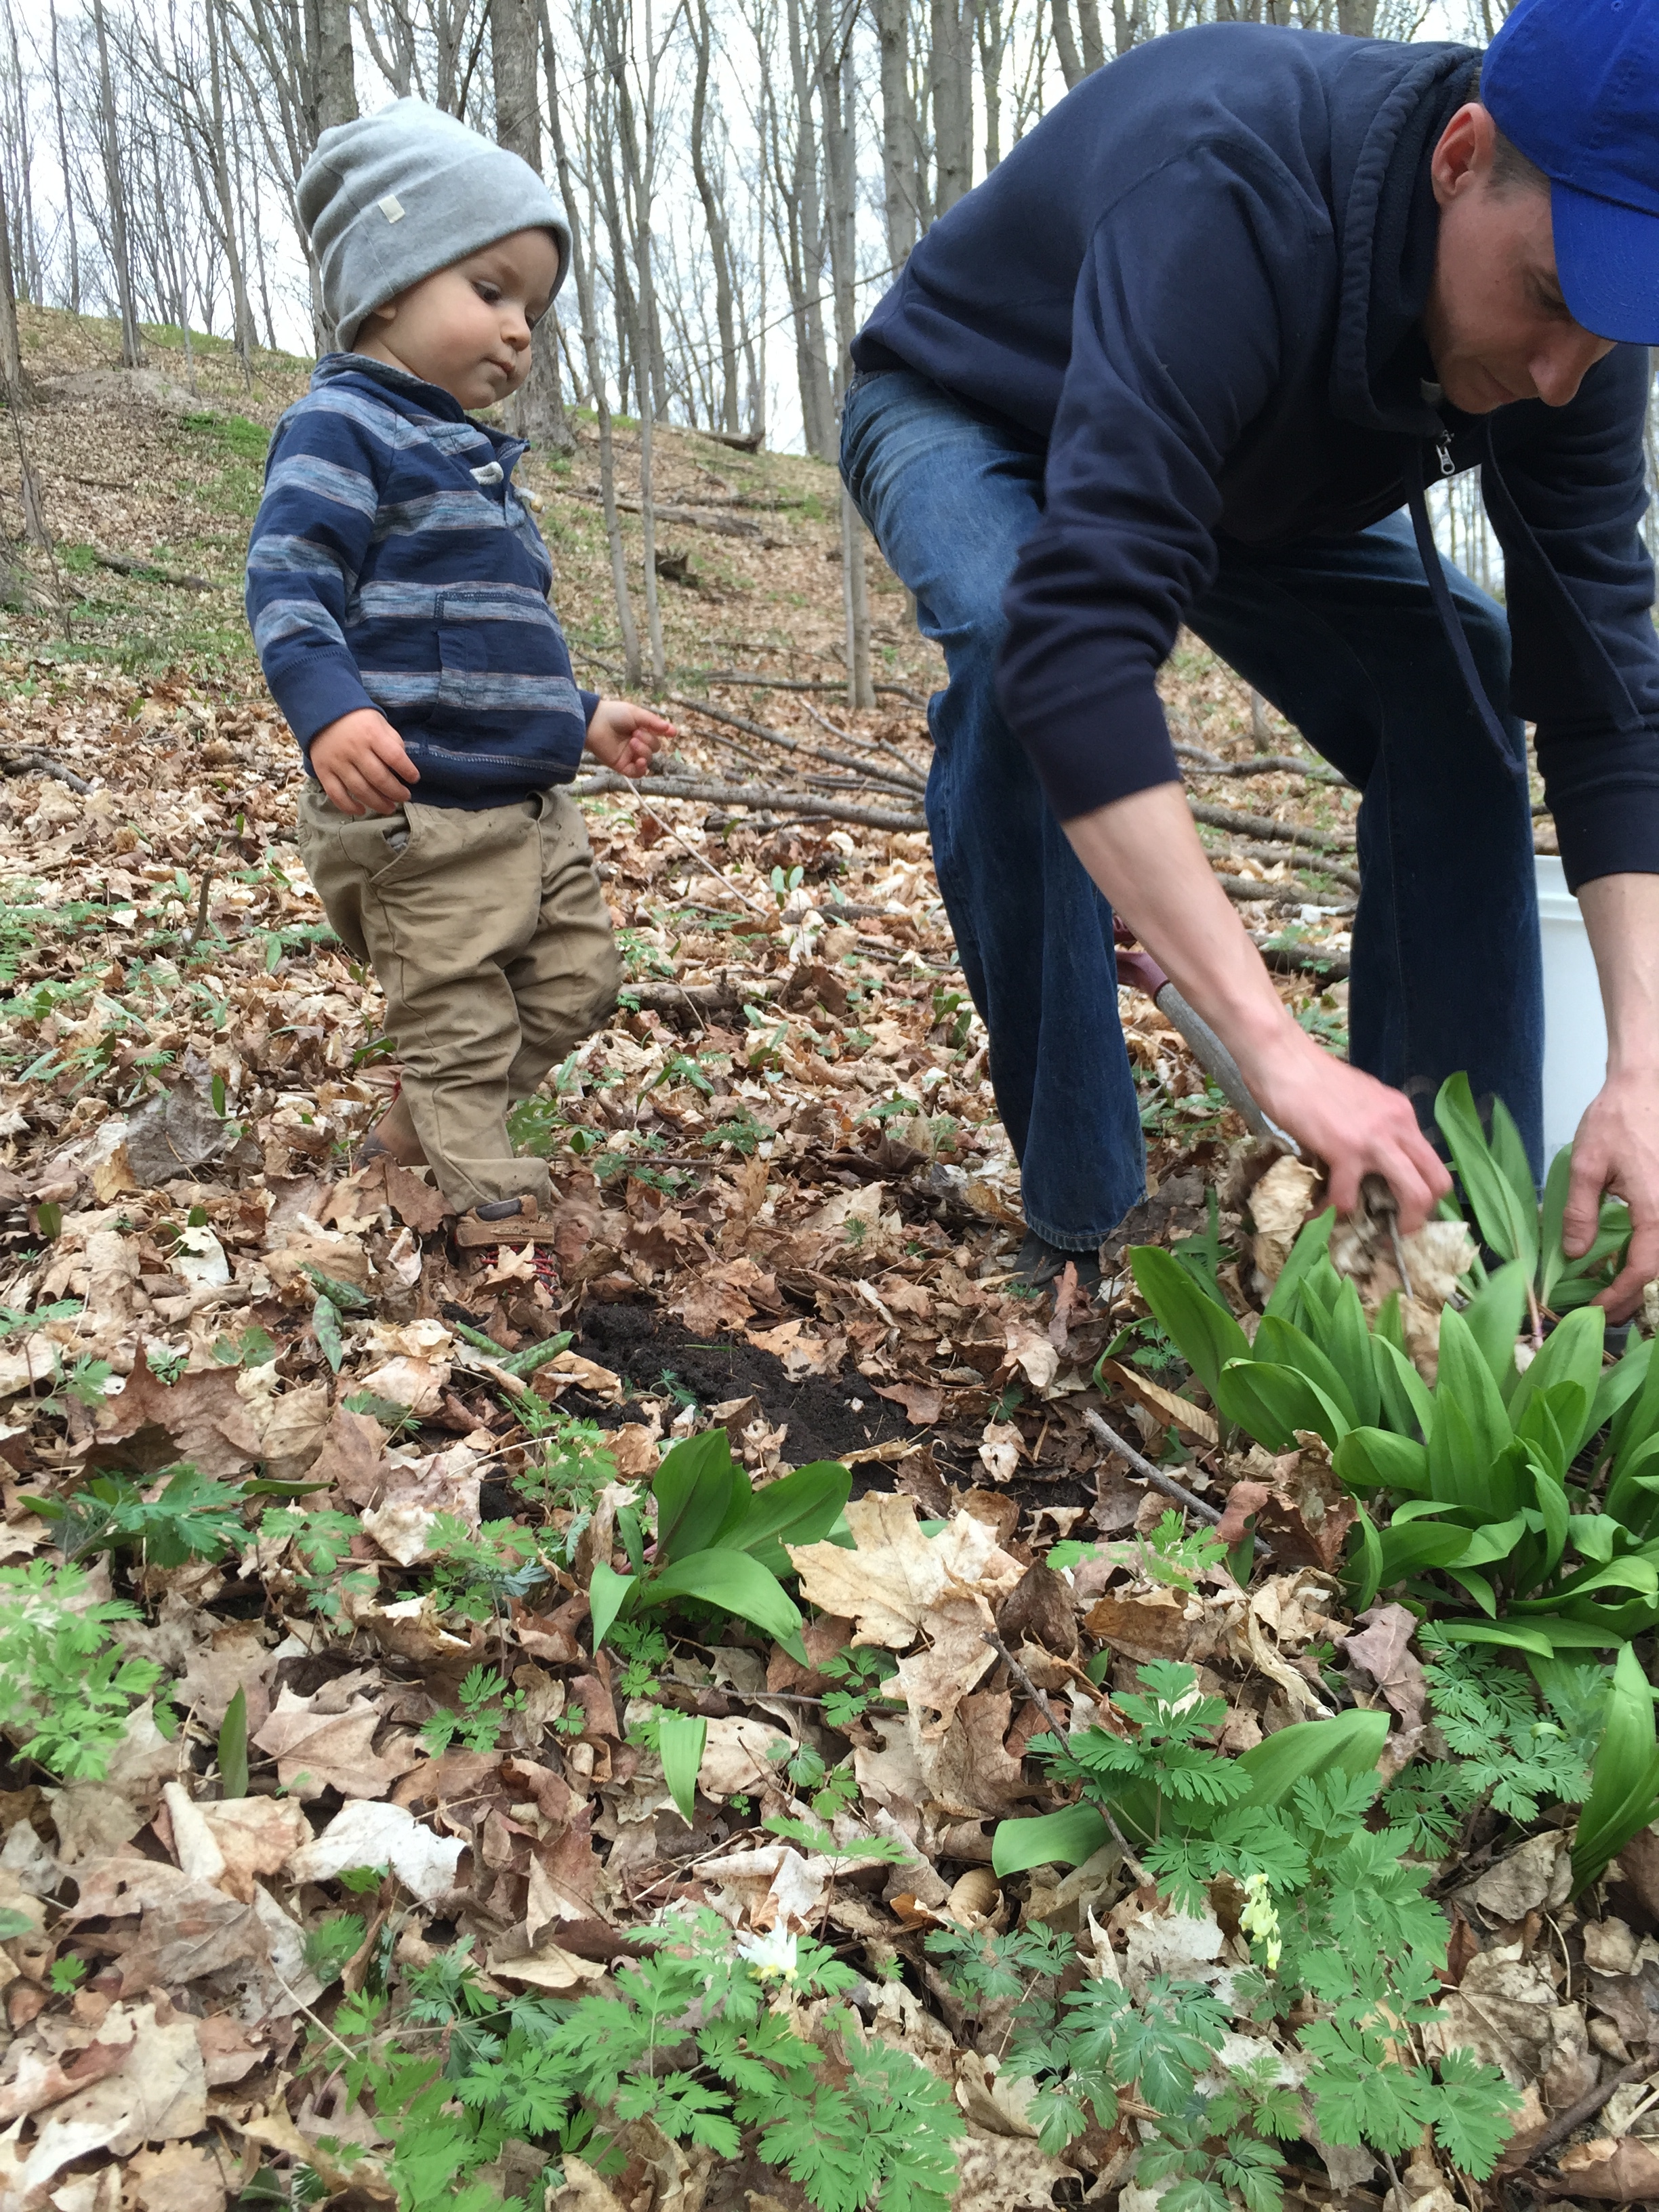   Chef Xel and little Kipp, foraging wild leeks on Pia’s property- leeks waiting to be transformed into soups and other dishes in Spring.  